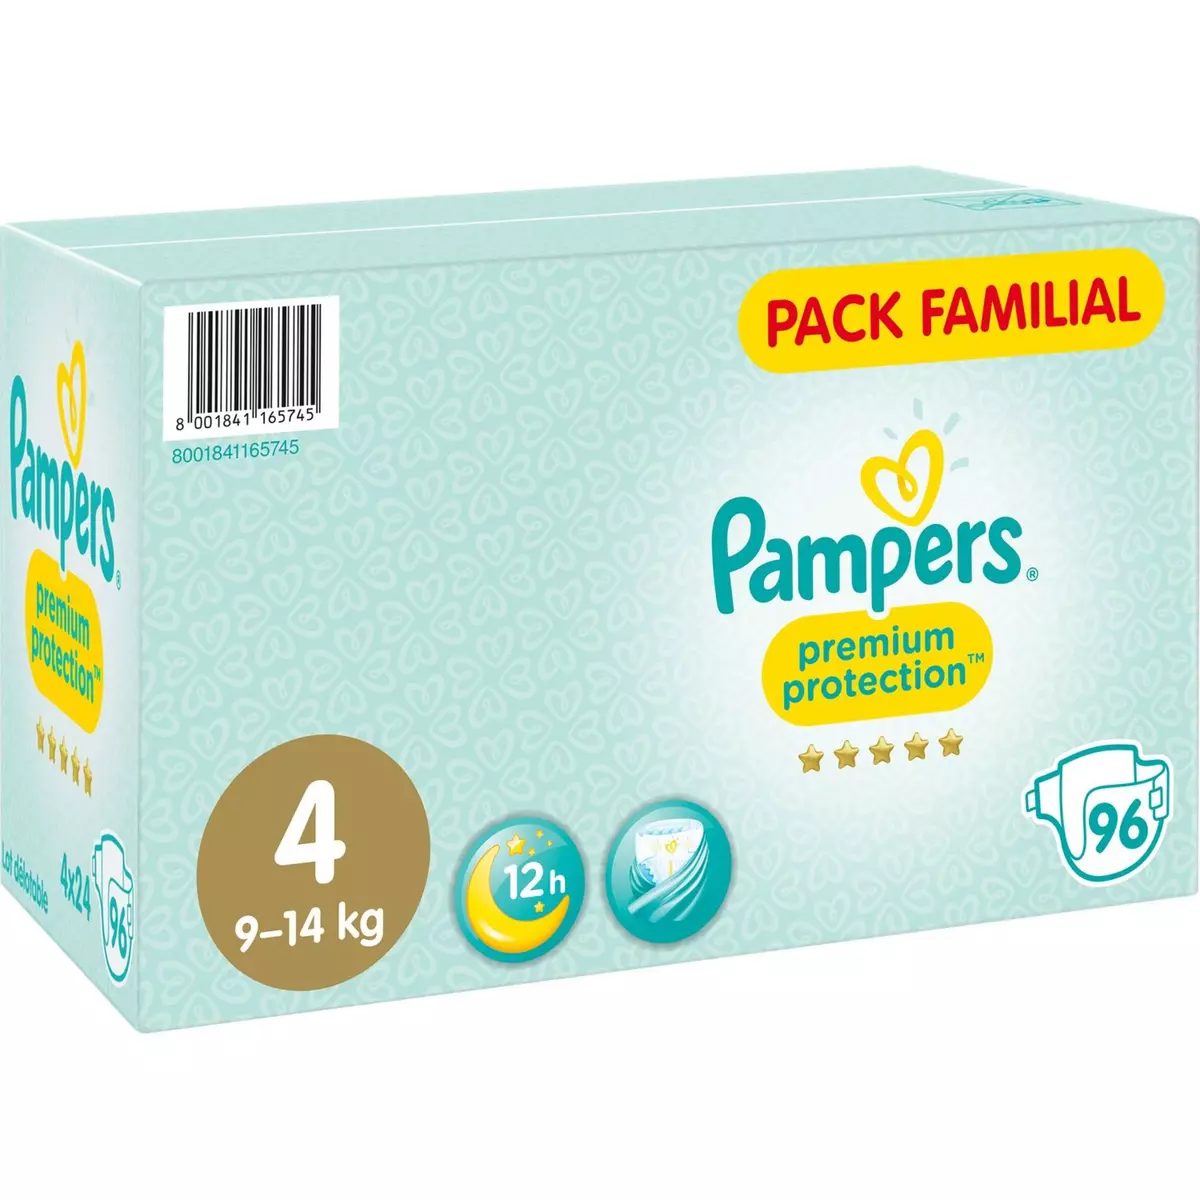 PAMPERS Pampers Premium protection pack familial couches taille 4 (9-14kg) x96 96 couches